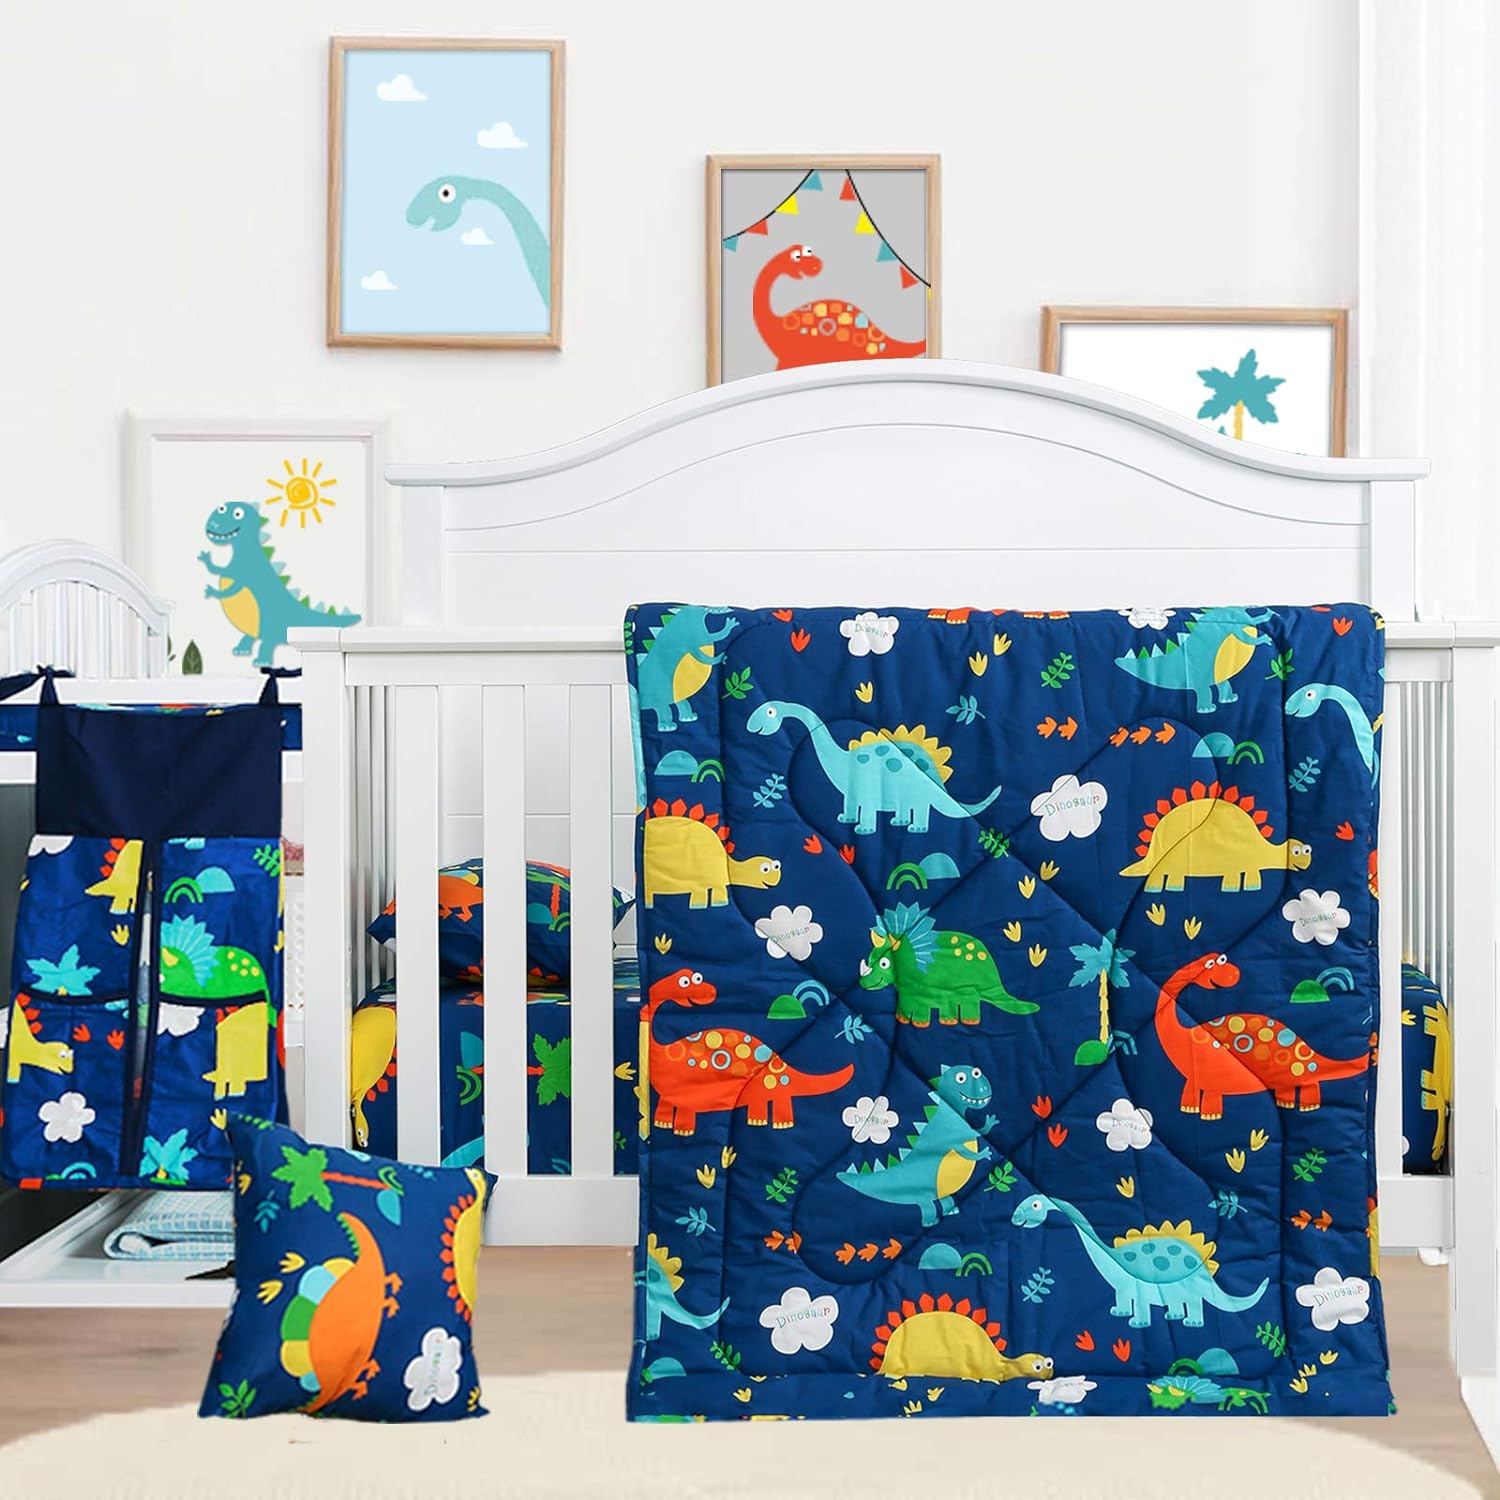 Great Choice Products Baby Bedding Set - Microfiber Standard Size 3 Piece Dinosaur Crib Bedding Set Soft Comforter Bed Set Includes Toddler Pillowc…